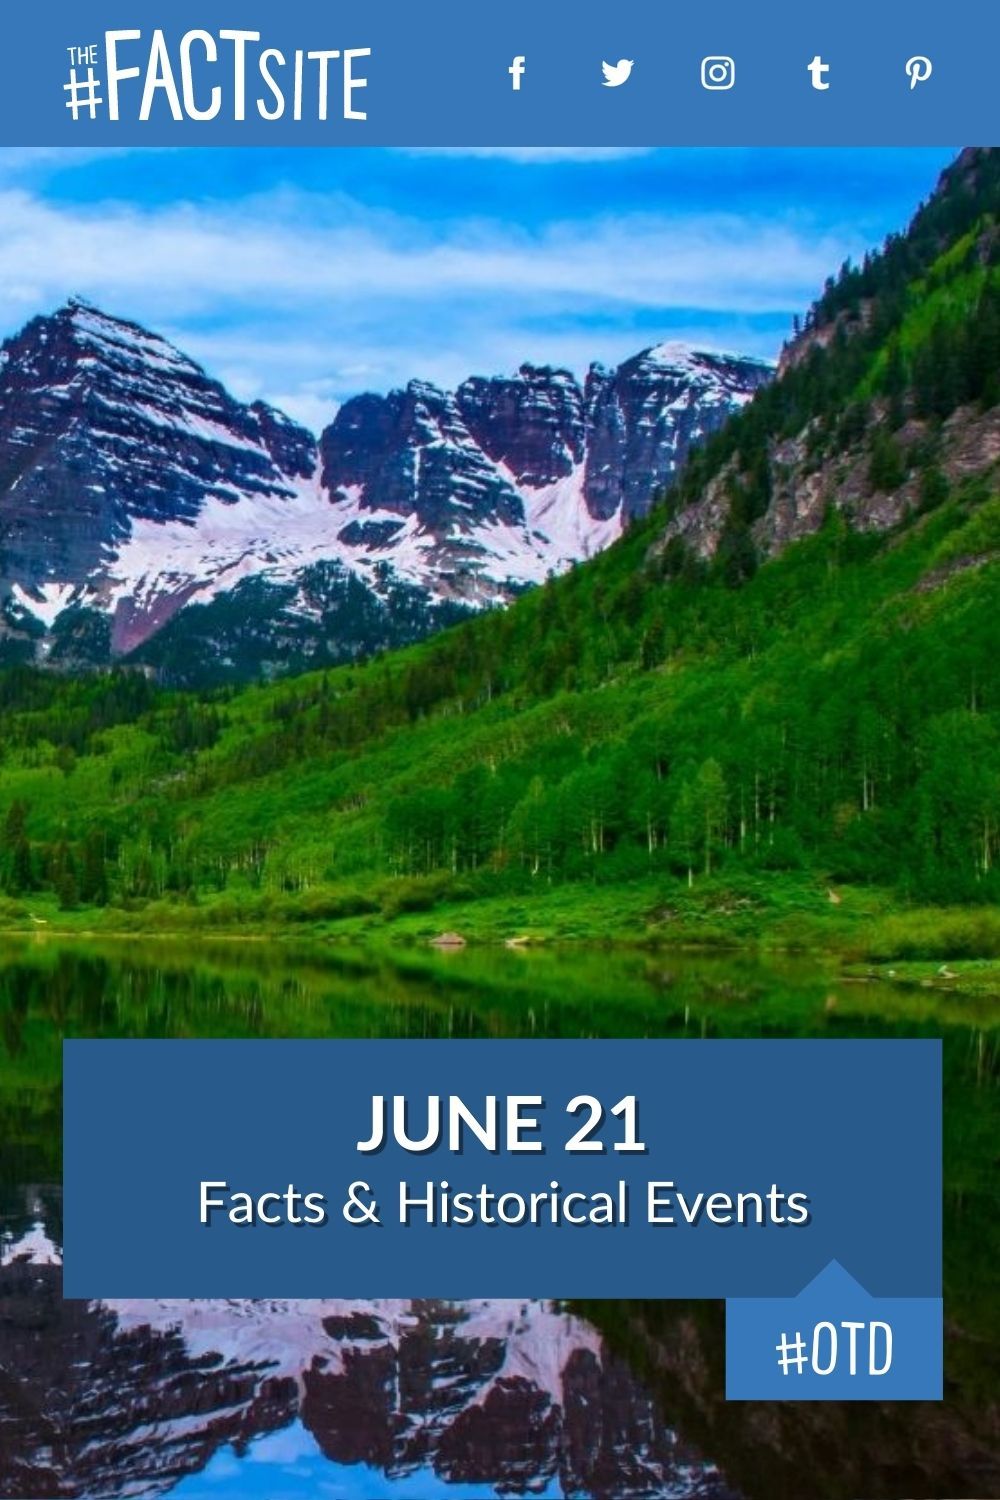 June 21: Facts & Historical Events On This Day